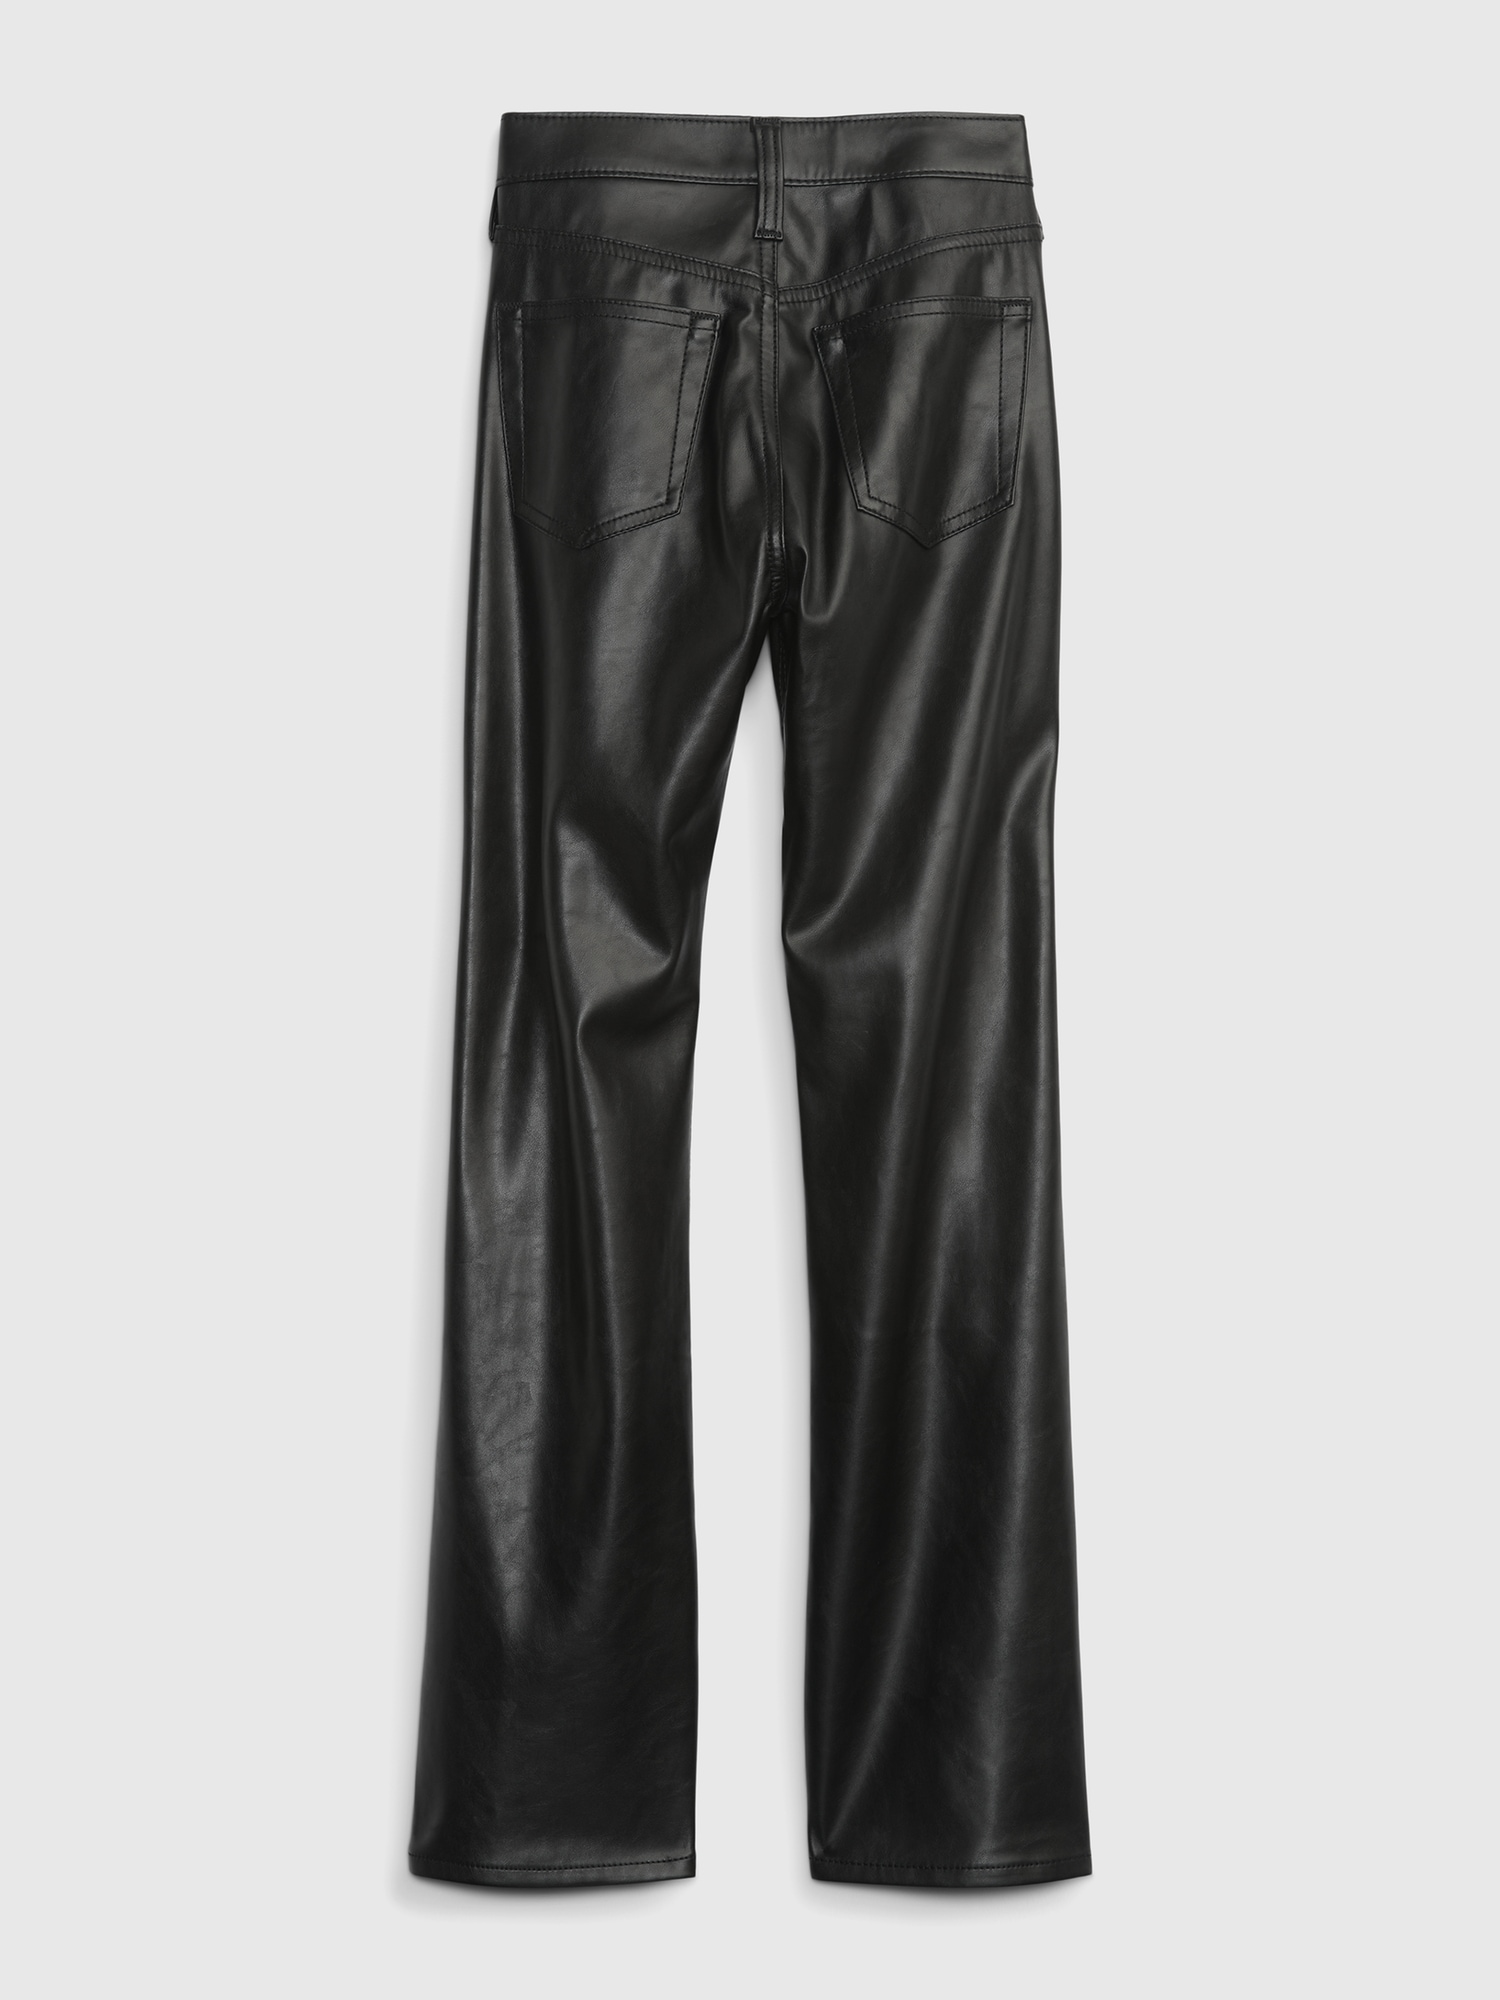 Black Star Leather Pants / Womens High Waisted Pants / 90s Vintage Black Leather  Trousers -  Canada